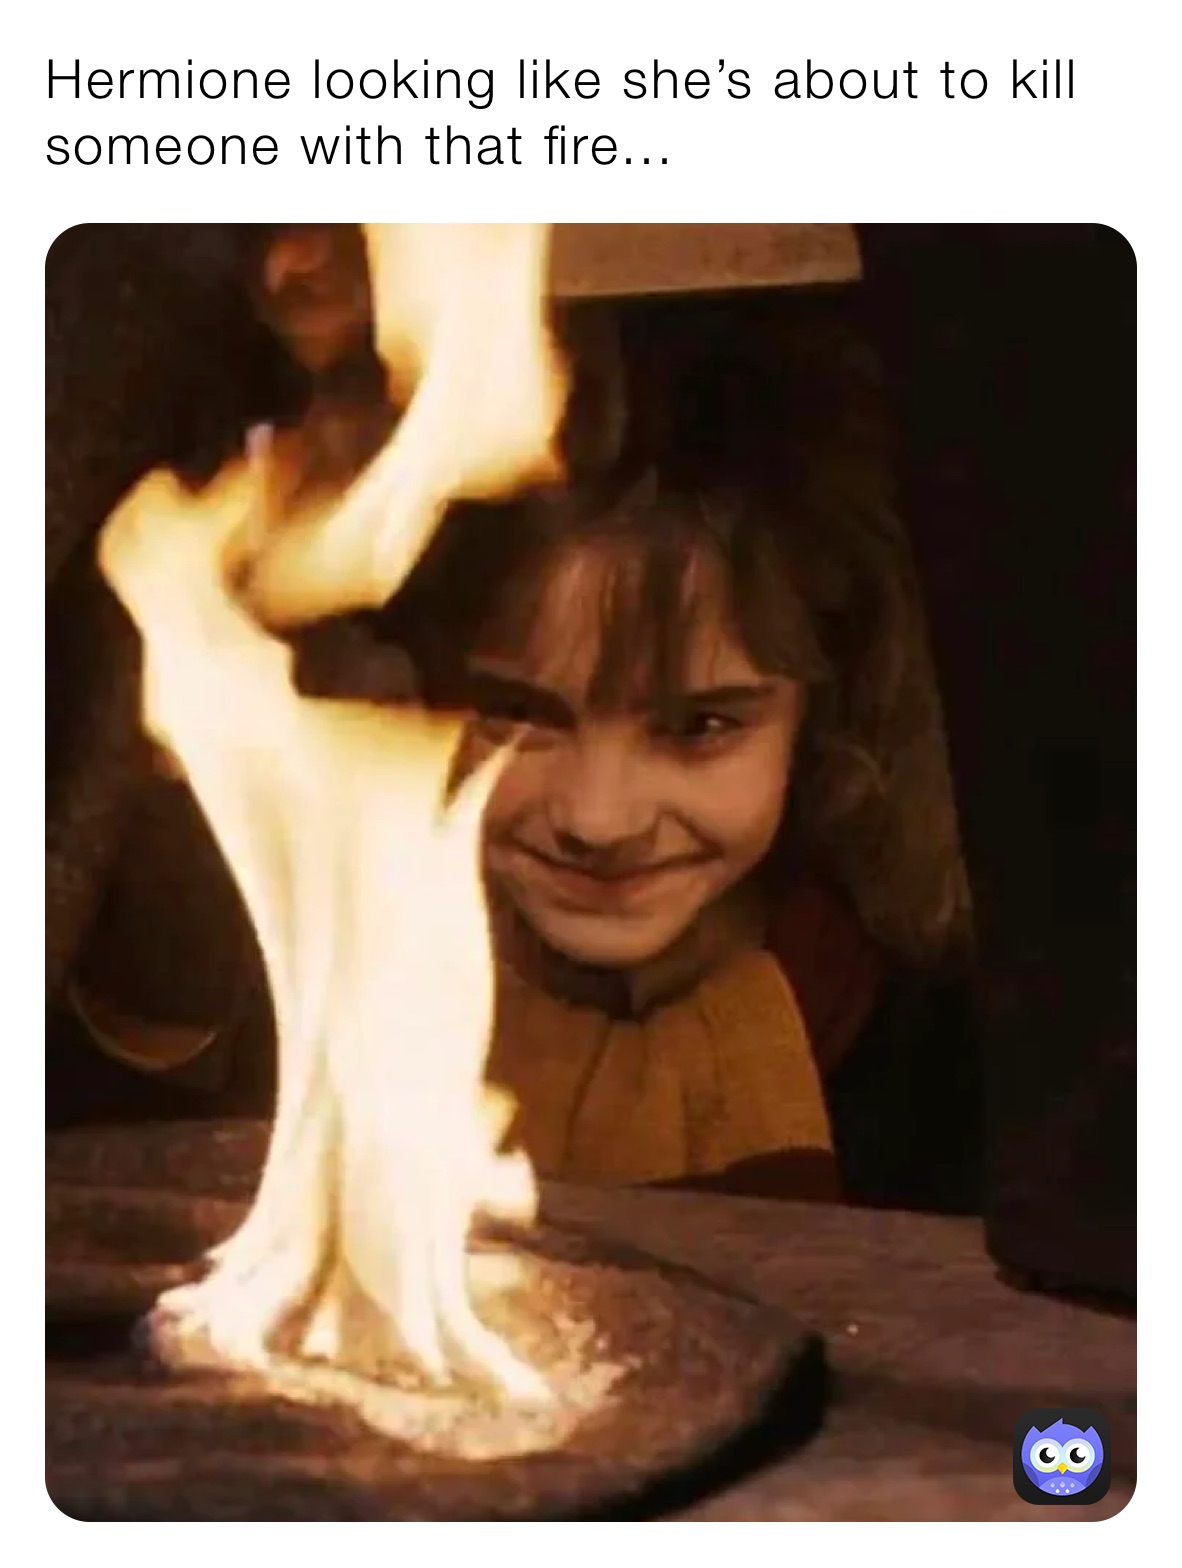 Hermione looking like she’s about to kill someone with that fire...￼